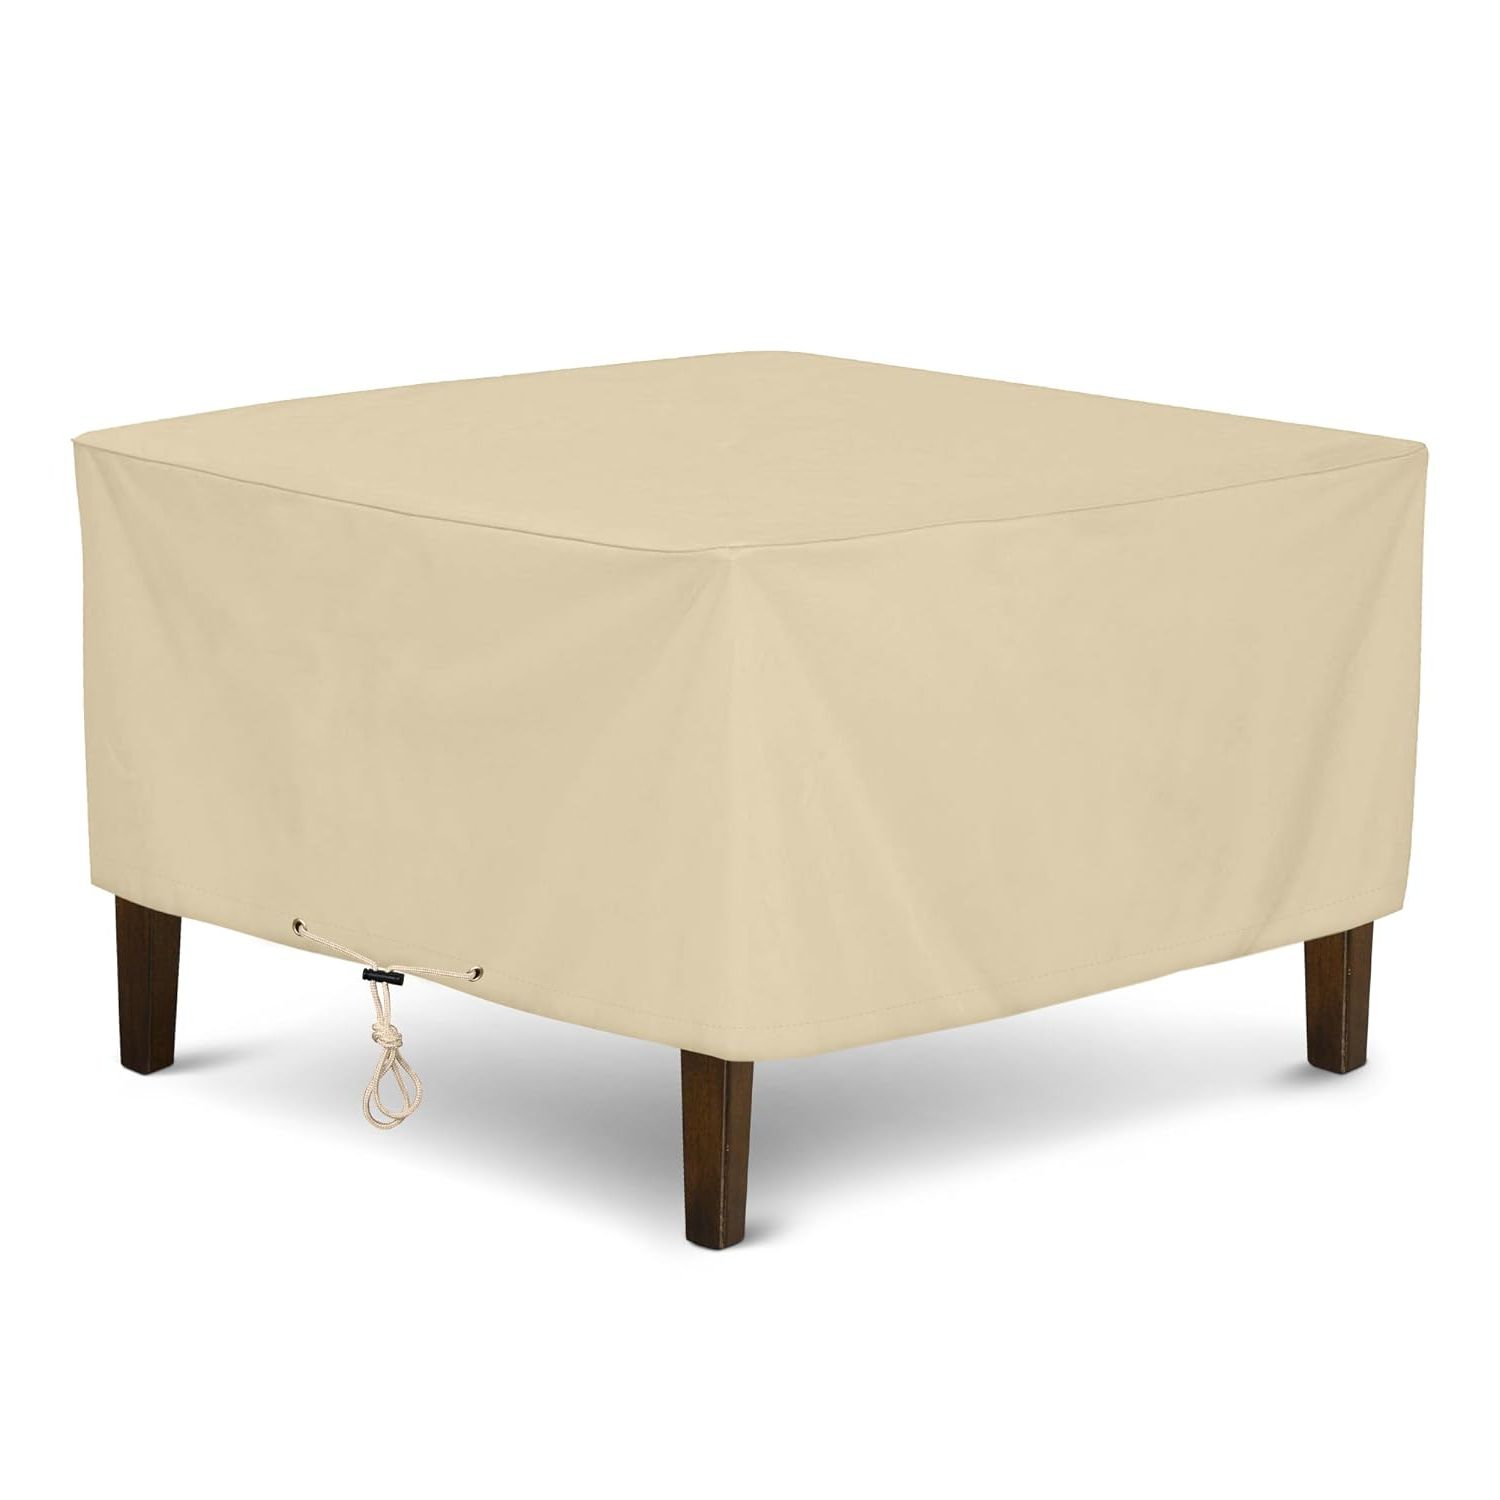 Best Outdoor Furniture Covers Waterproof Square Coffee Table – Your House Intended For 2019 Waterproof Coffee Tables (View 14 of 15)